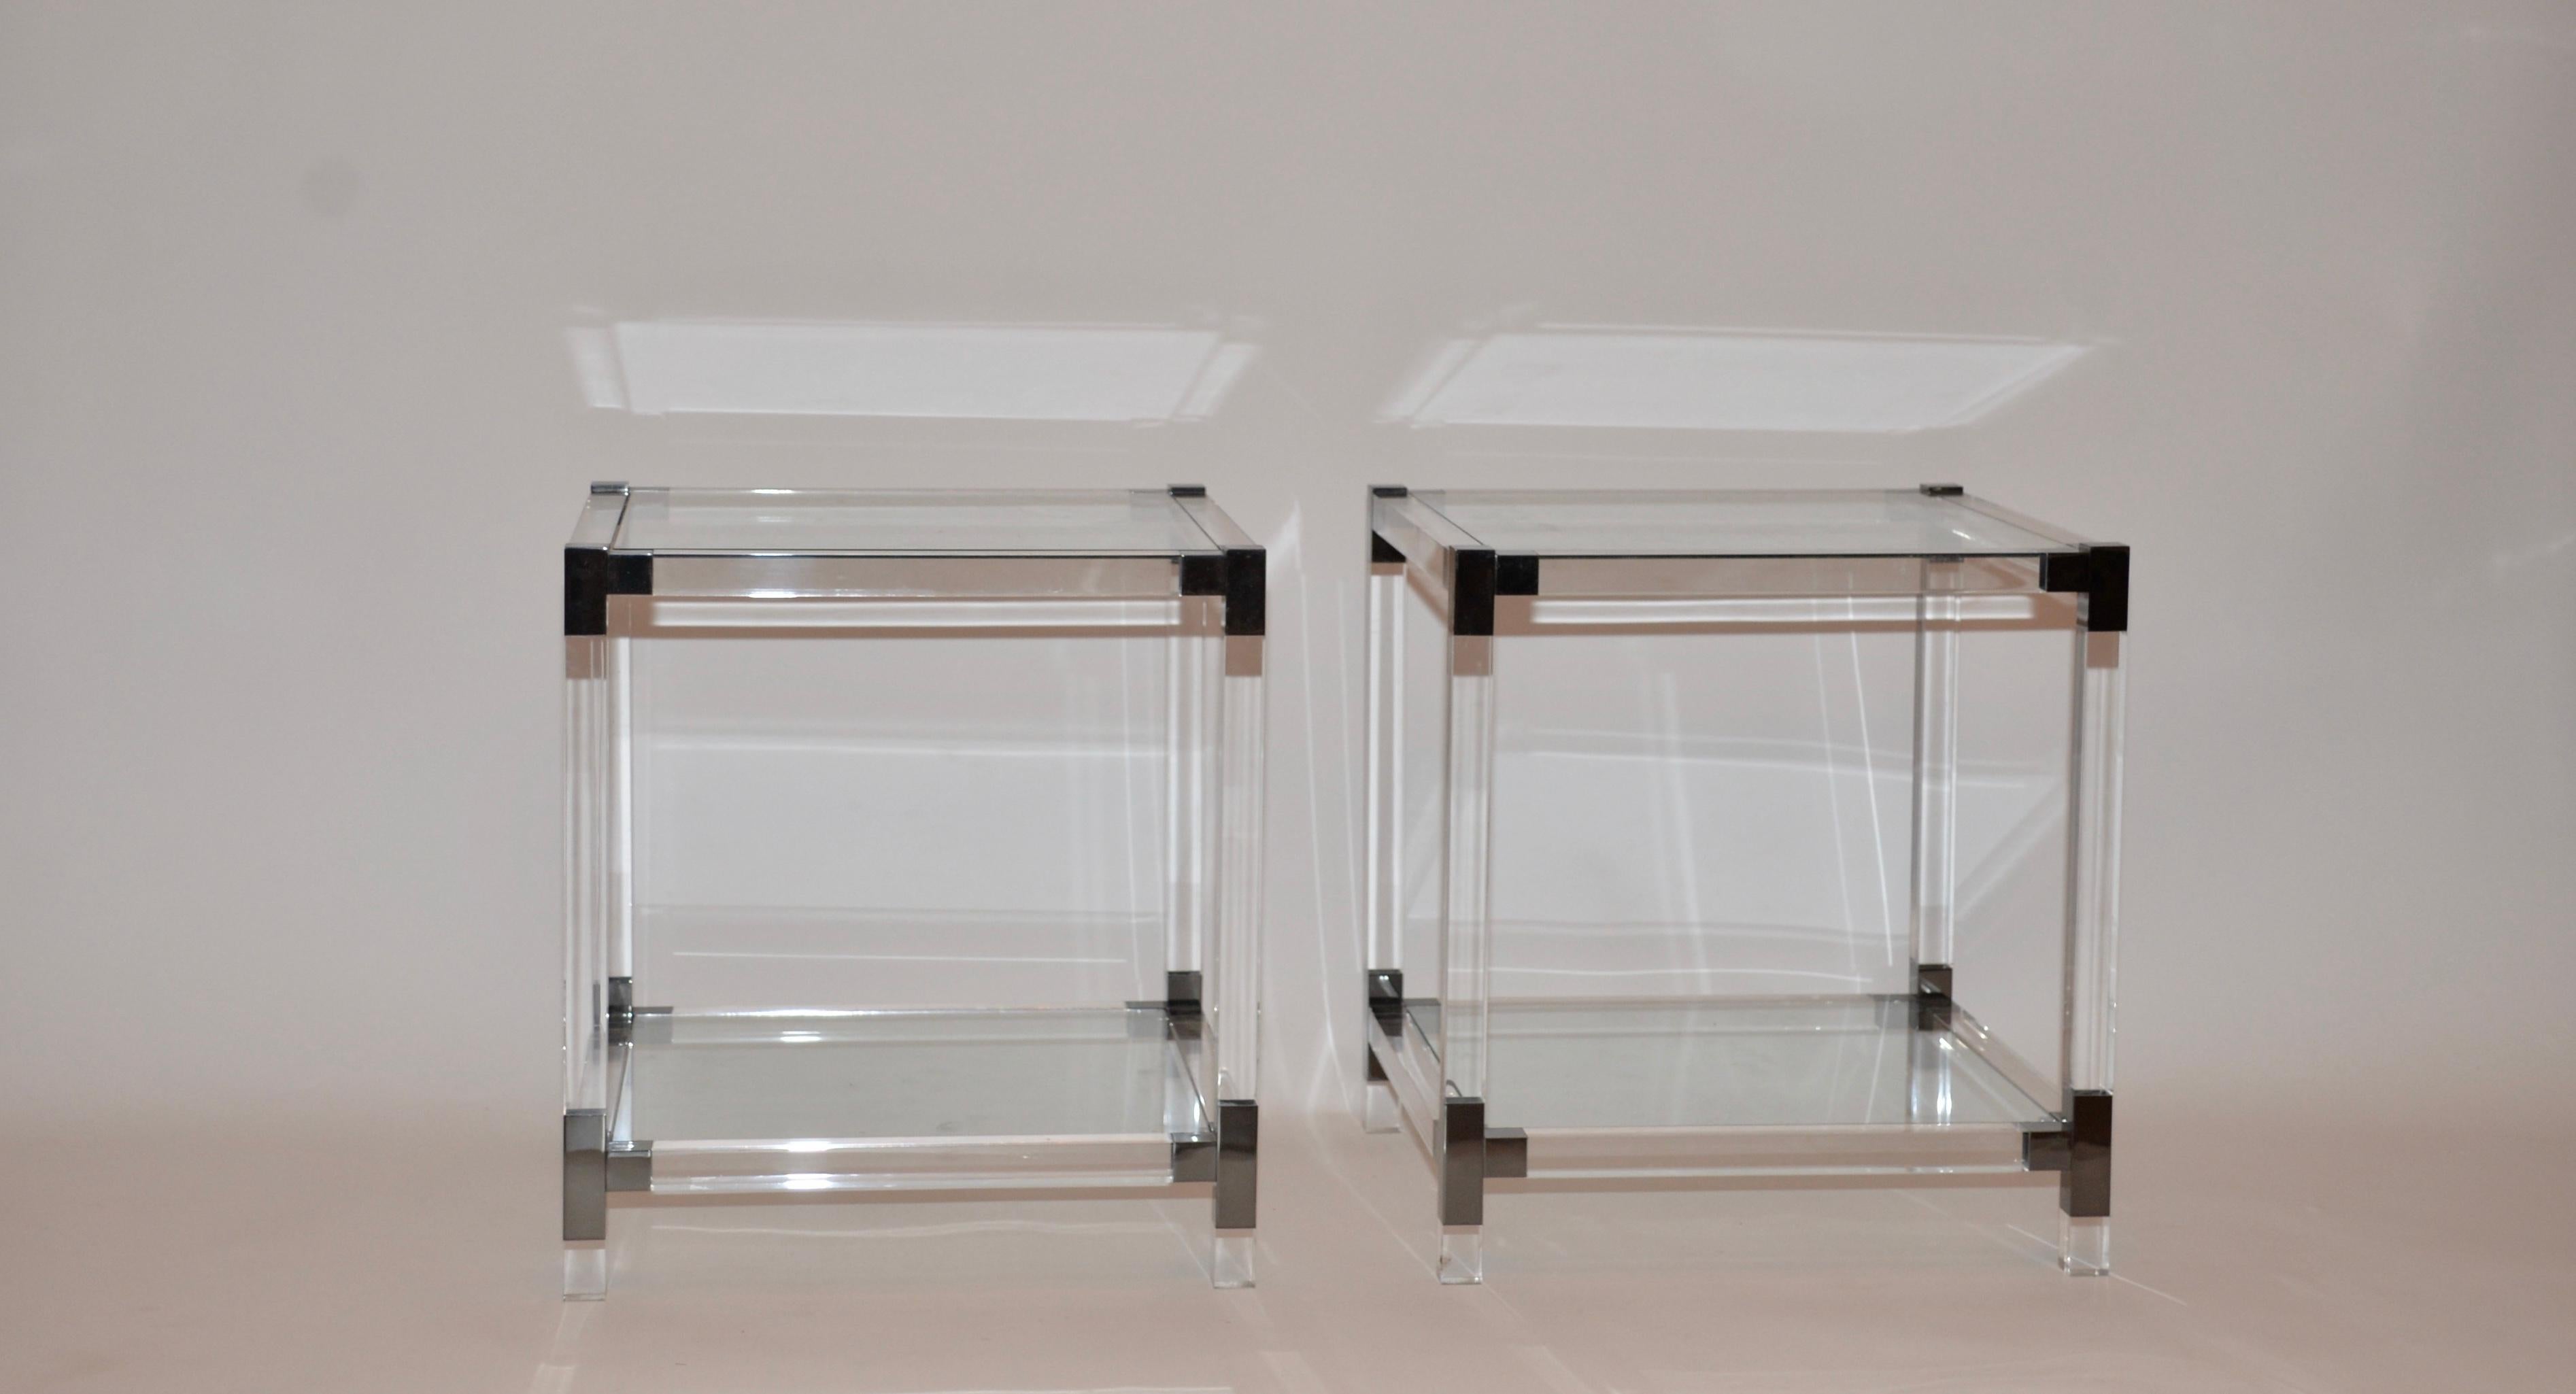 A pair of Lucite and glass Hollywood Regency side tables. The frames are Lucite, two glass shelves with the top shelf being beveled glass. Each corner is finished in chrome.